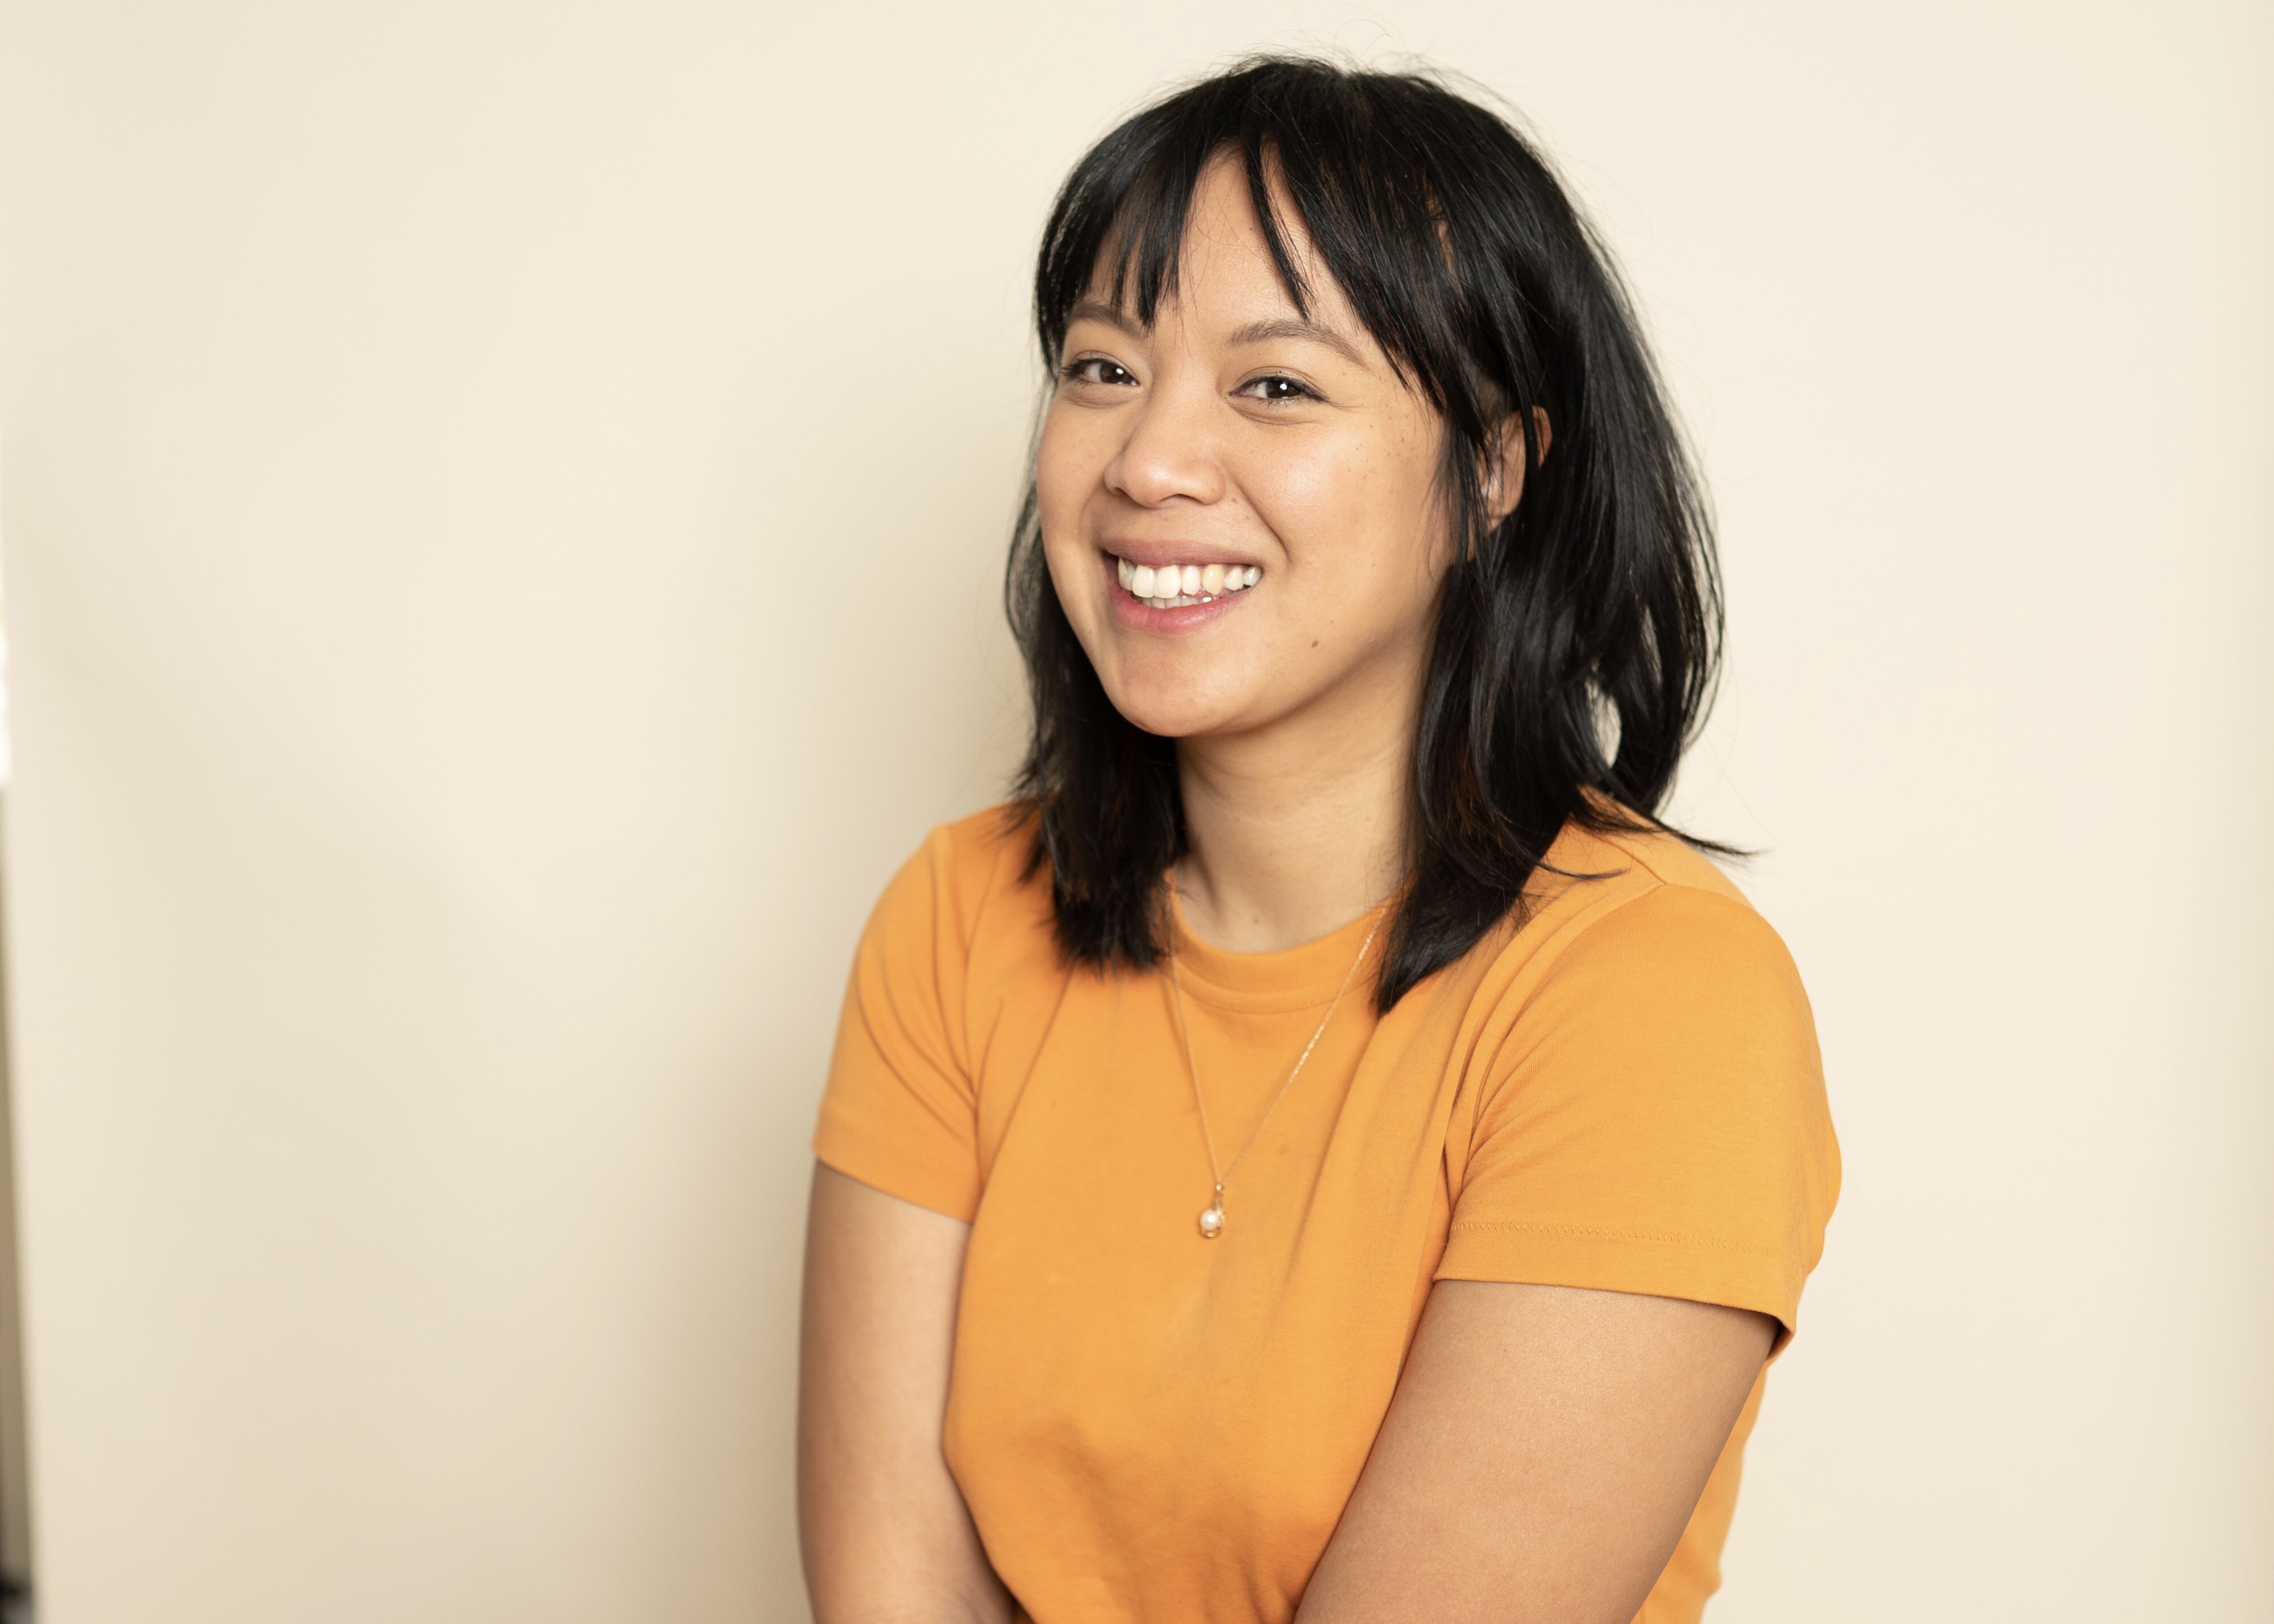 Diane Lam sits in front of a beige wall wearing a yellow-orange shirt. She is a young Cambodian-American woman with black hair and bangs.